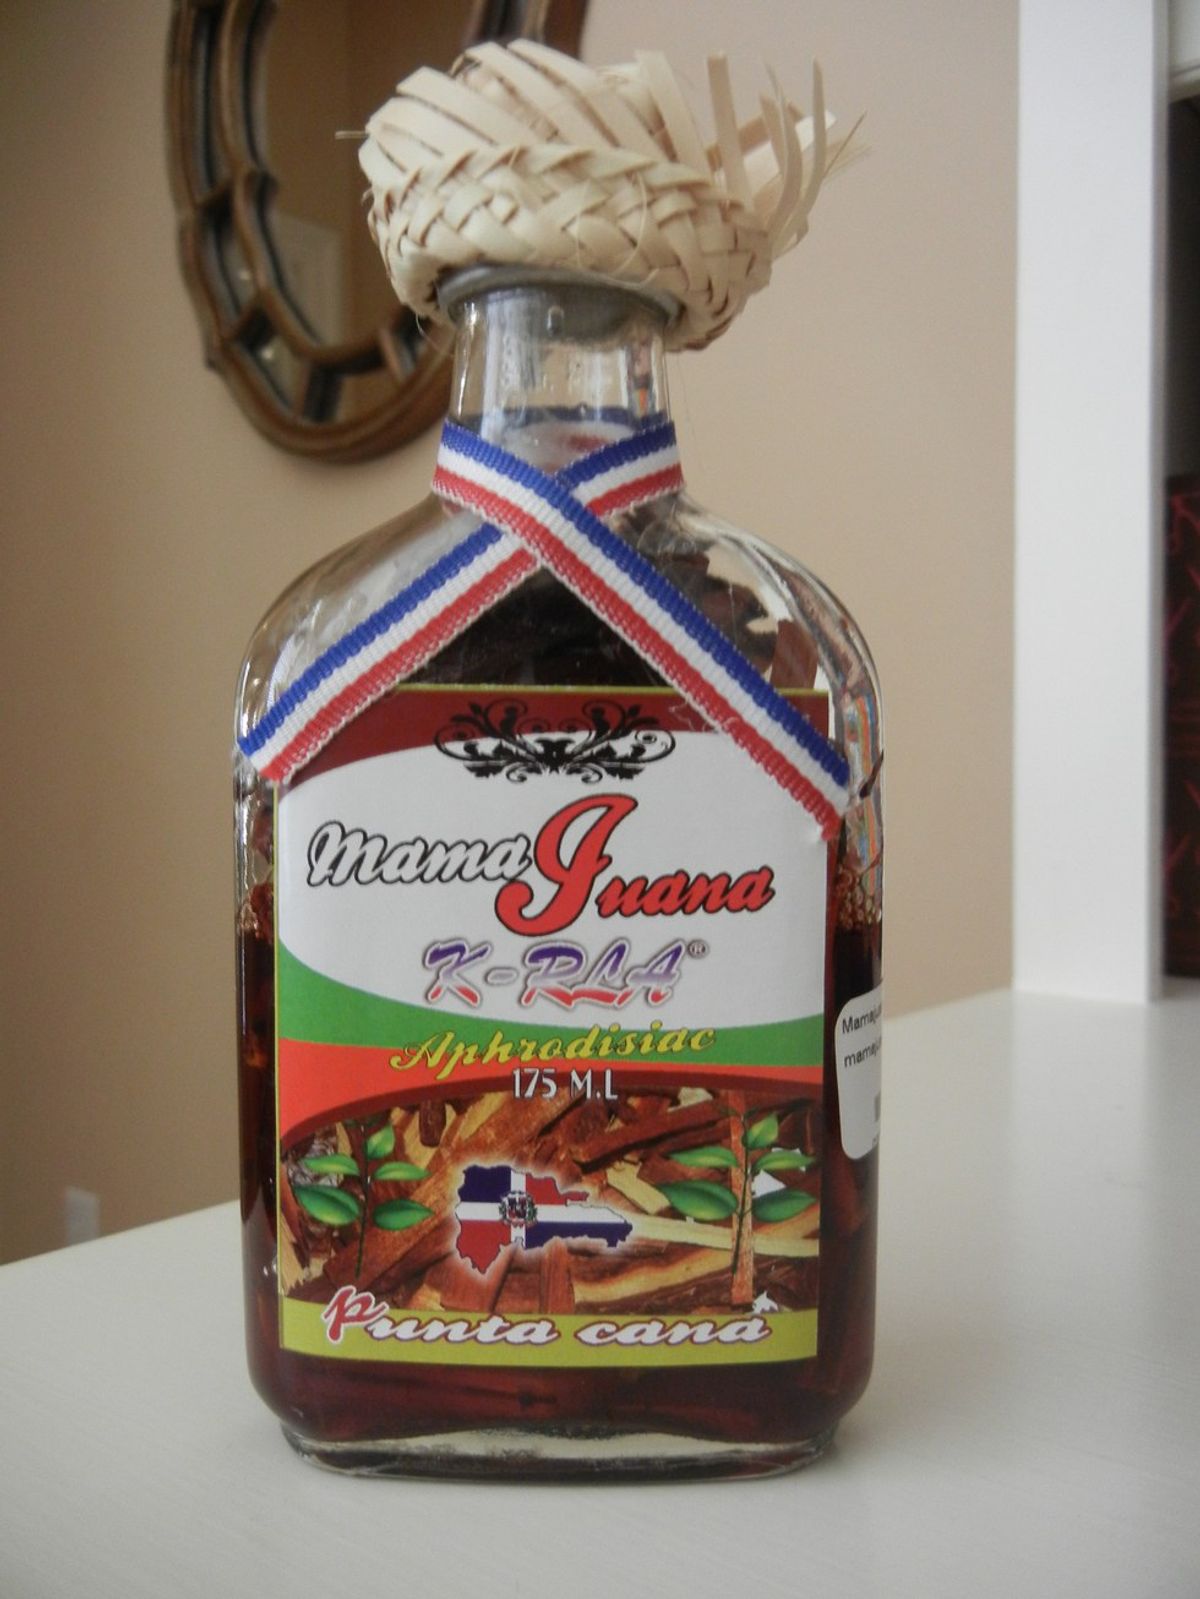 MamaJuana: The Dominican Drink Of Choice